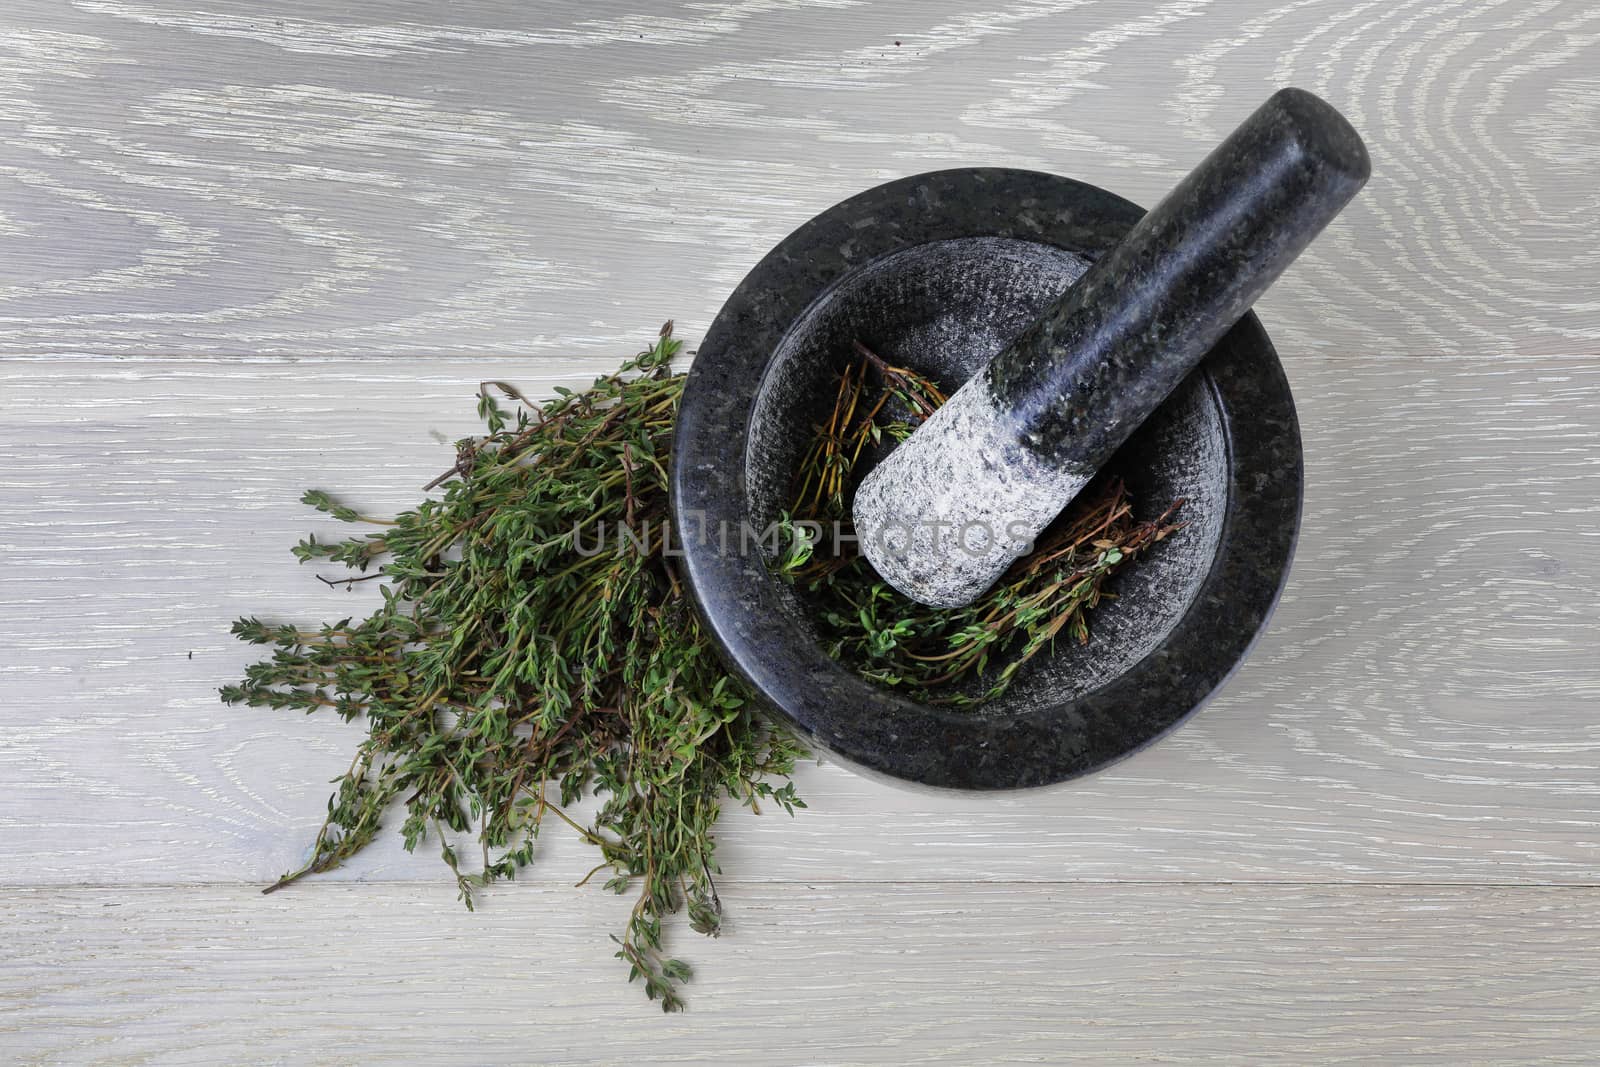 Top view of thyme on wood surface and mortar and pestle by VivacityImages